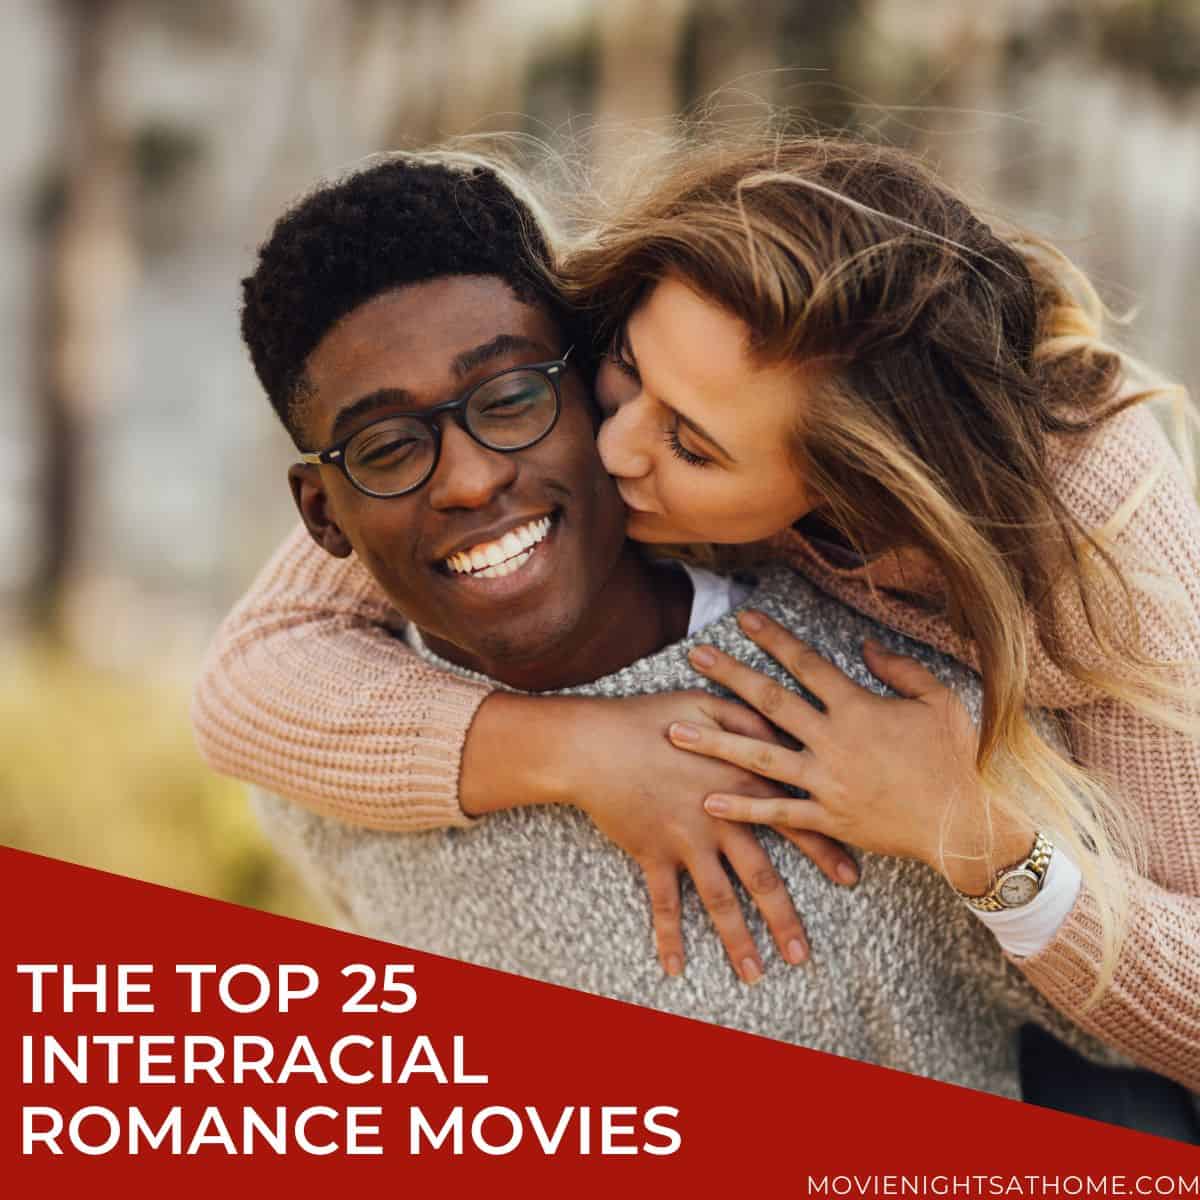 alexandra gagne recommends black man white woman romance movies pic